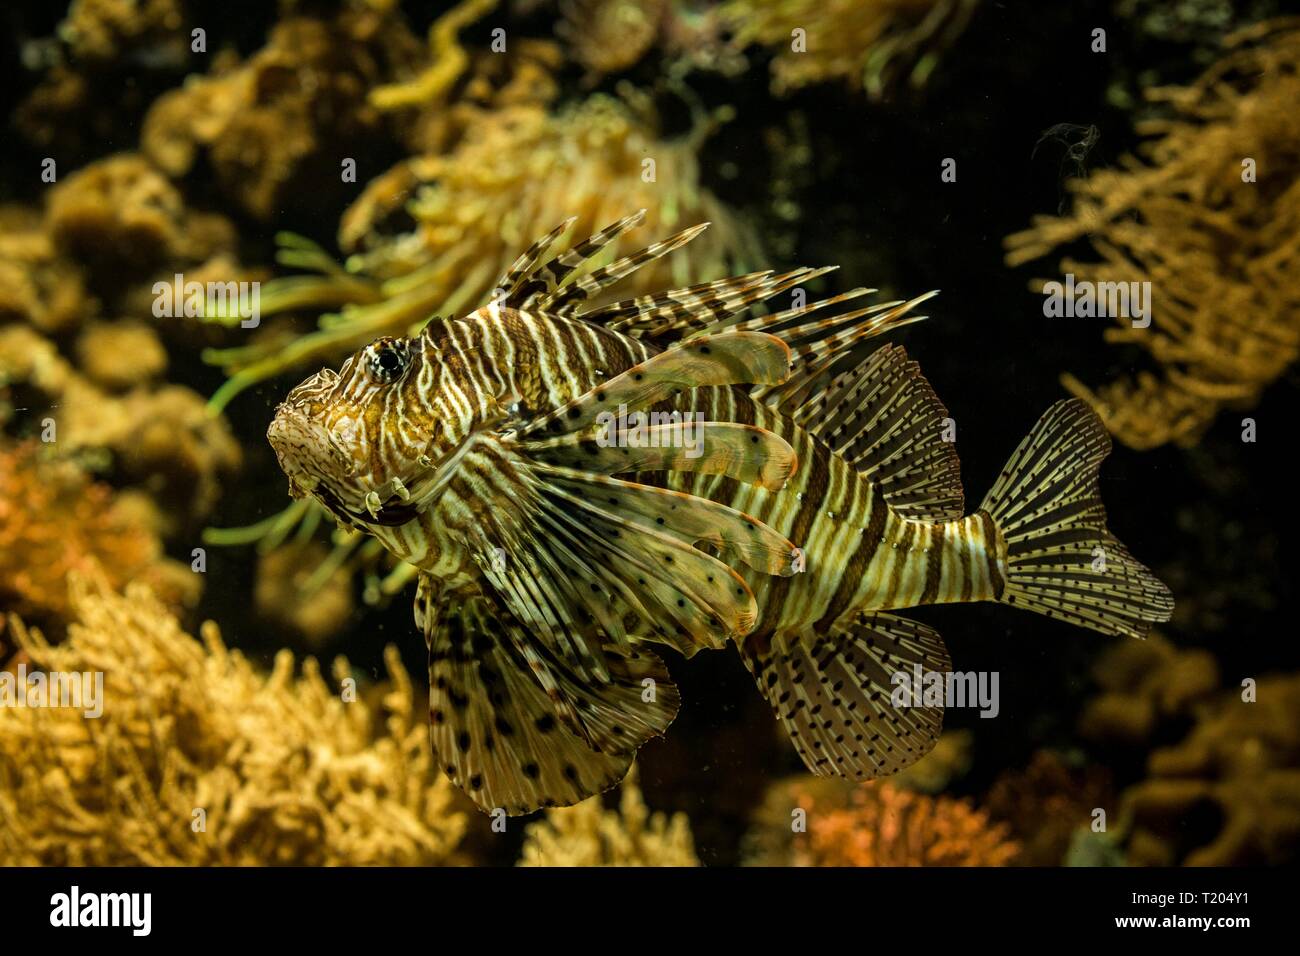 Red lionfish (Pterois volitans), venomous coral reef fish, Salt water marine fish, beautiful fish with tropical corals in background Stock Photo